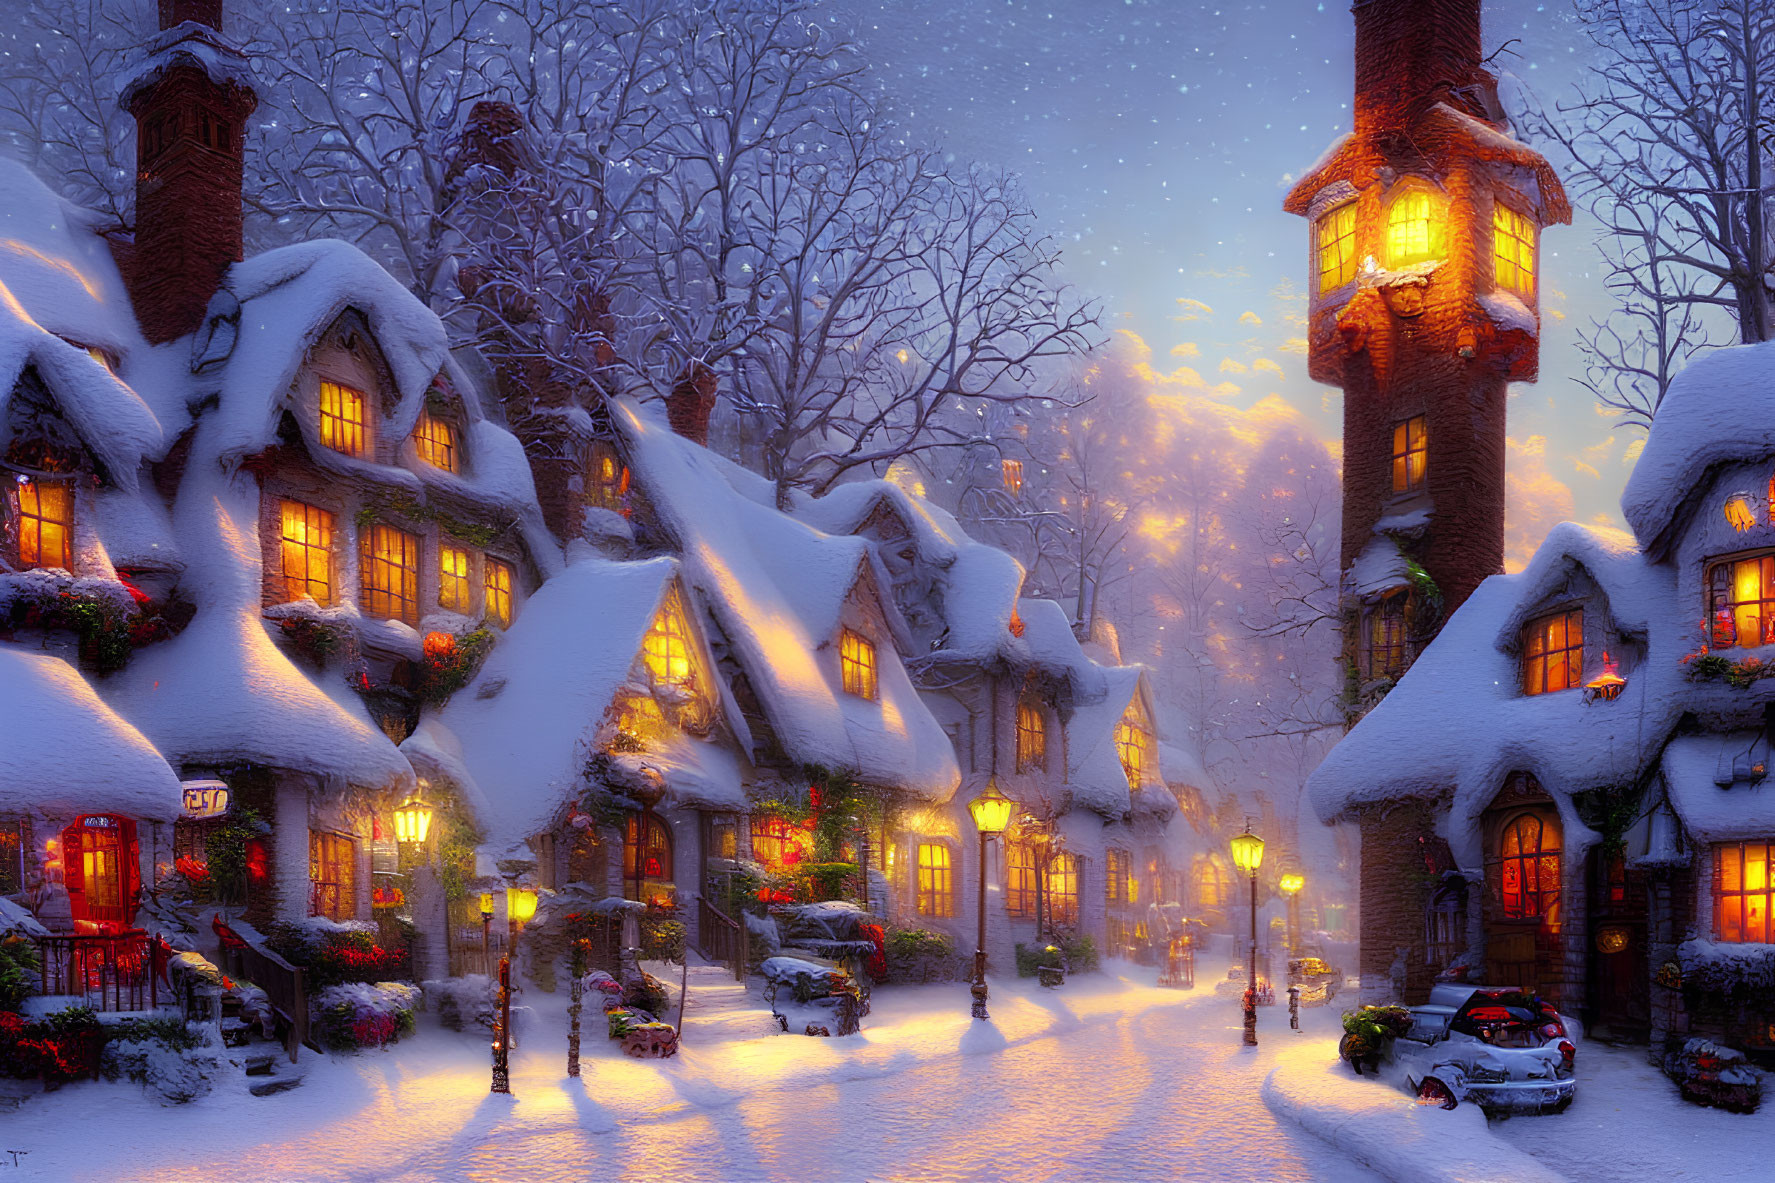 Snow-covered houses and cobblestone street in charming winter scene